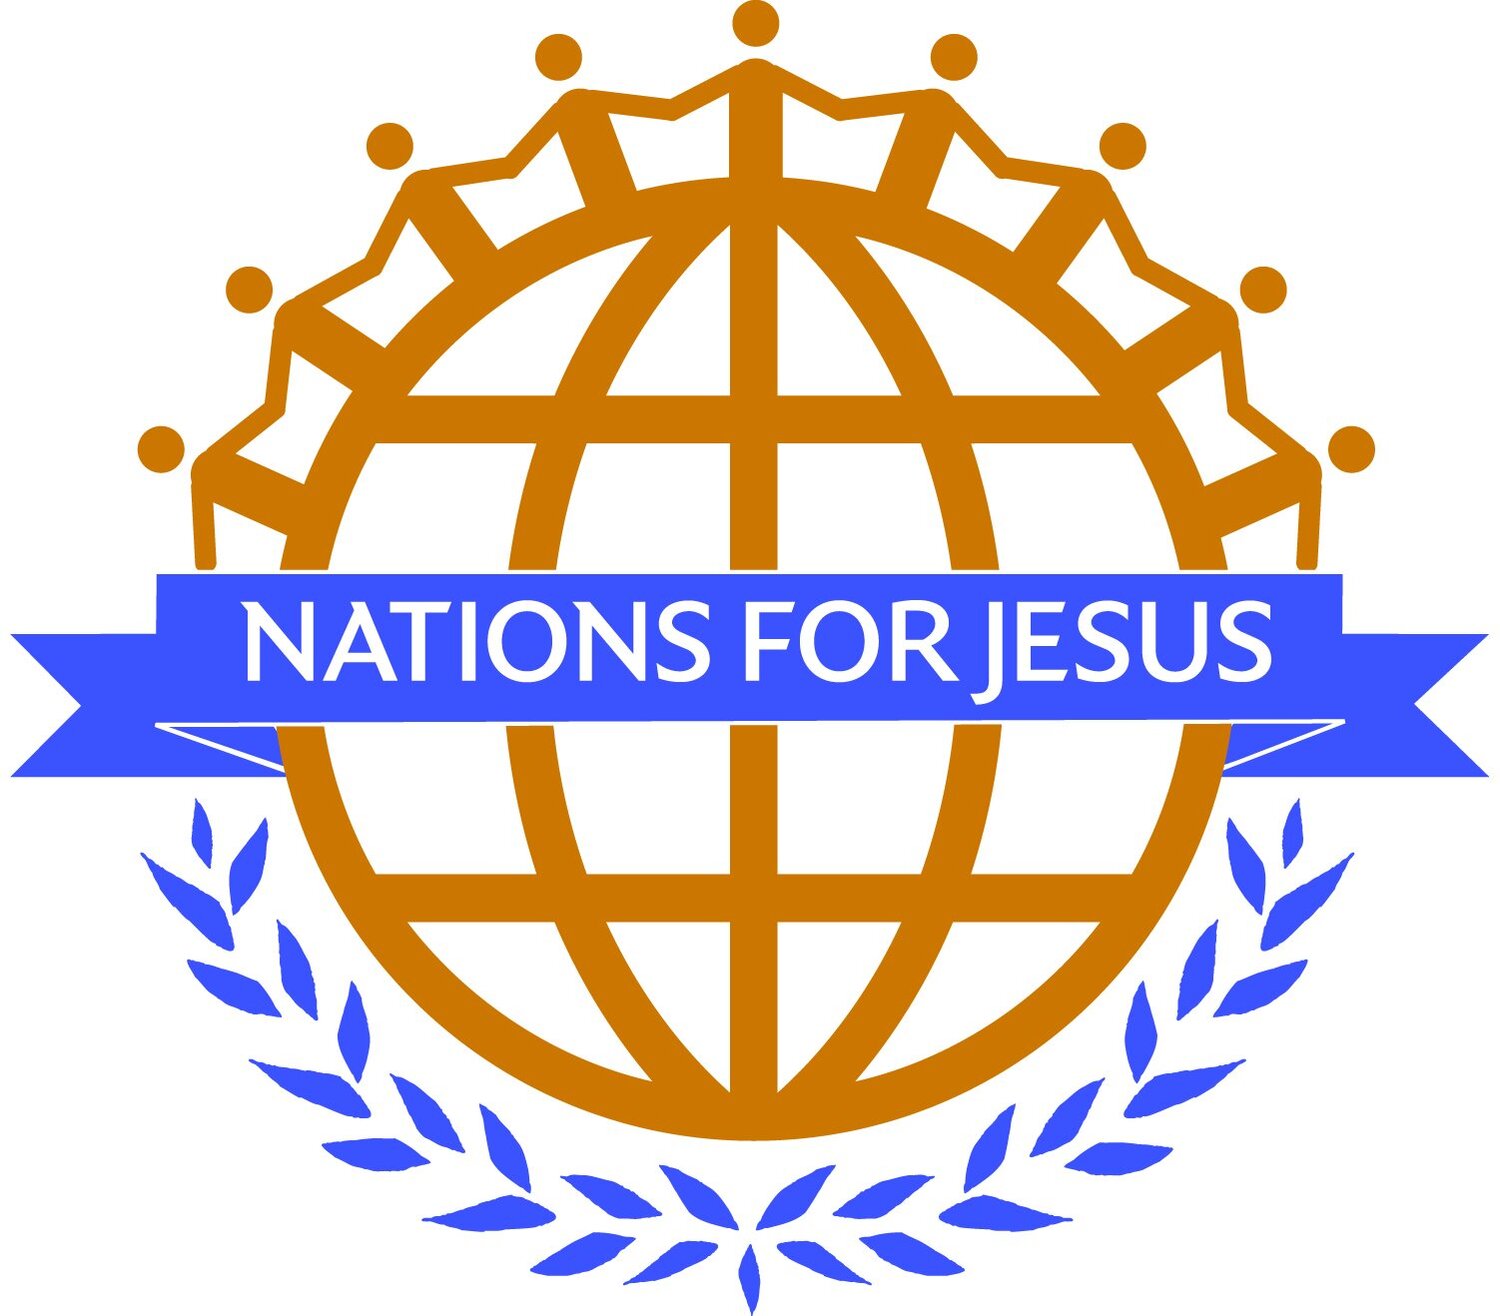 Nations for Jesus